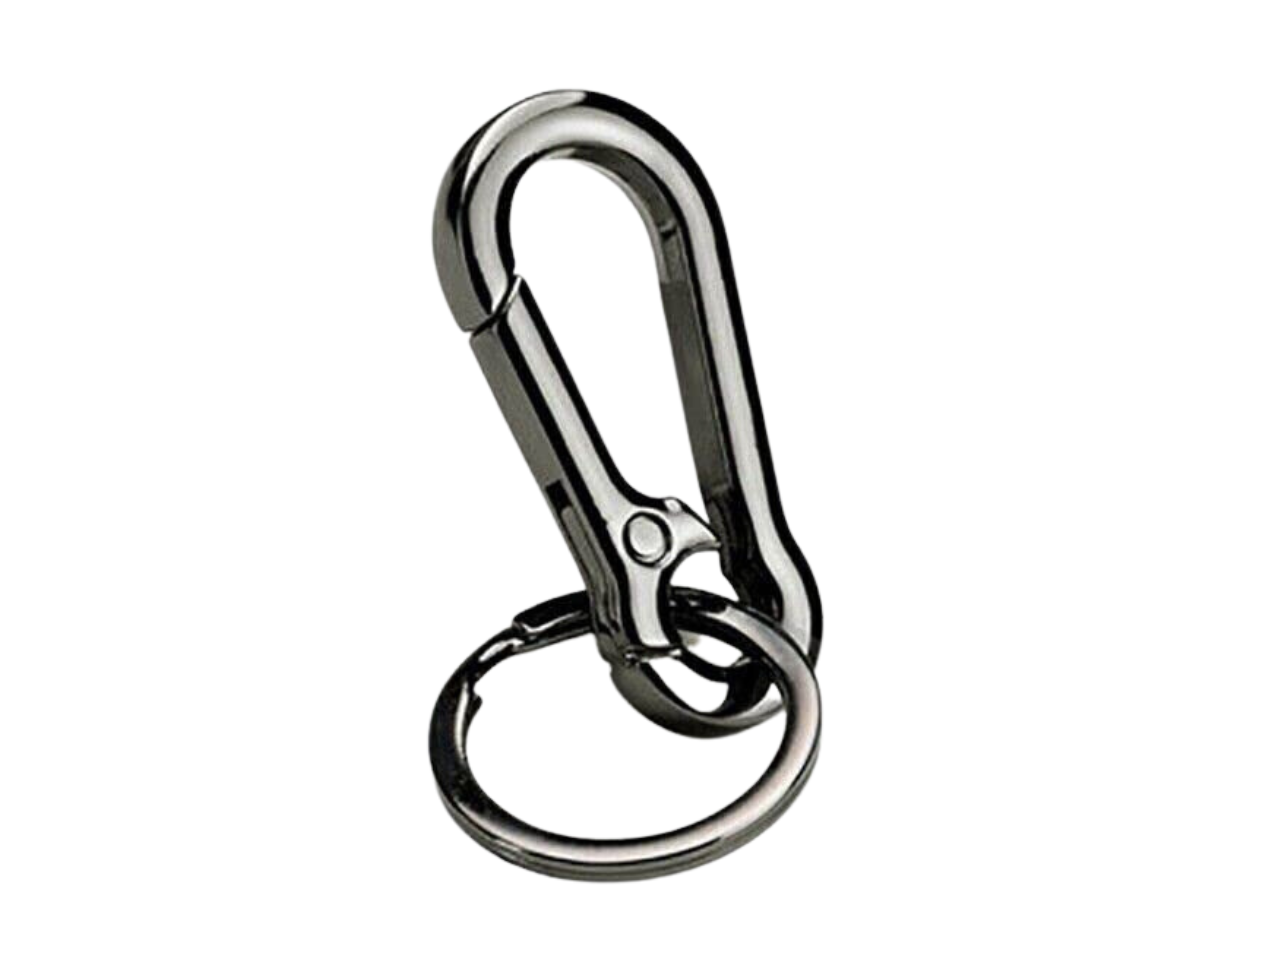 Carabiner Stainless Steel Keychain with Snap Hook Quick Release Key Rings